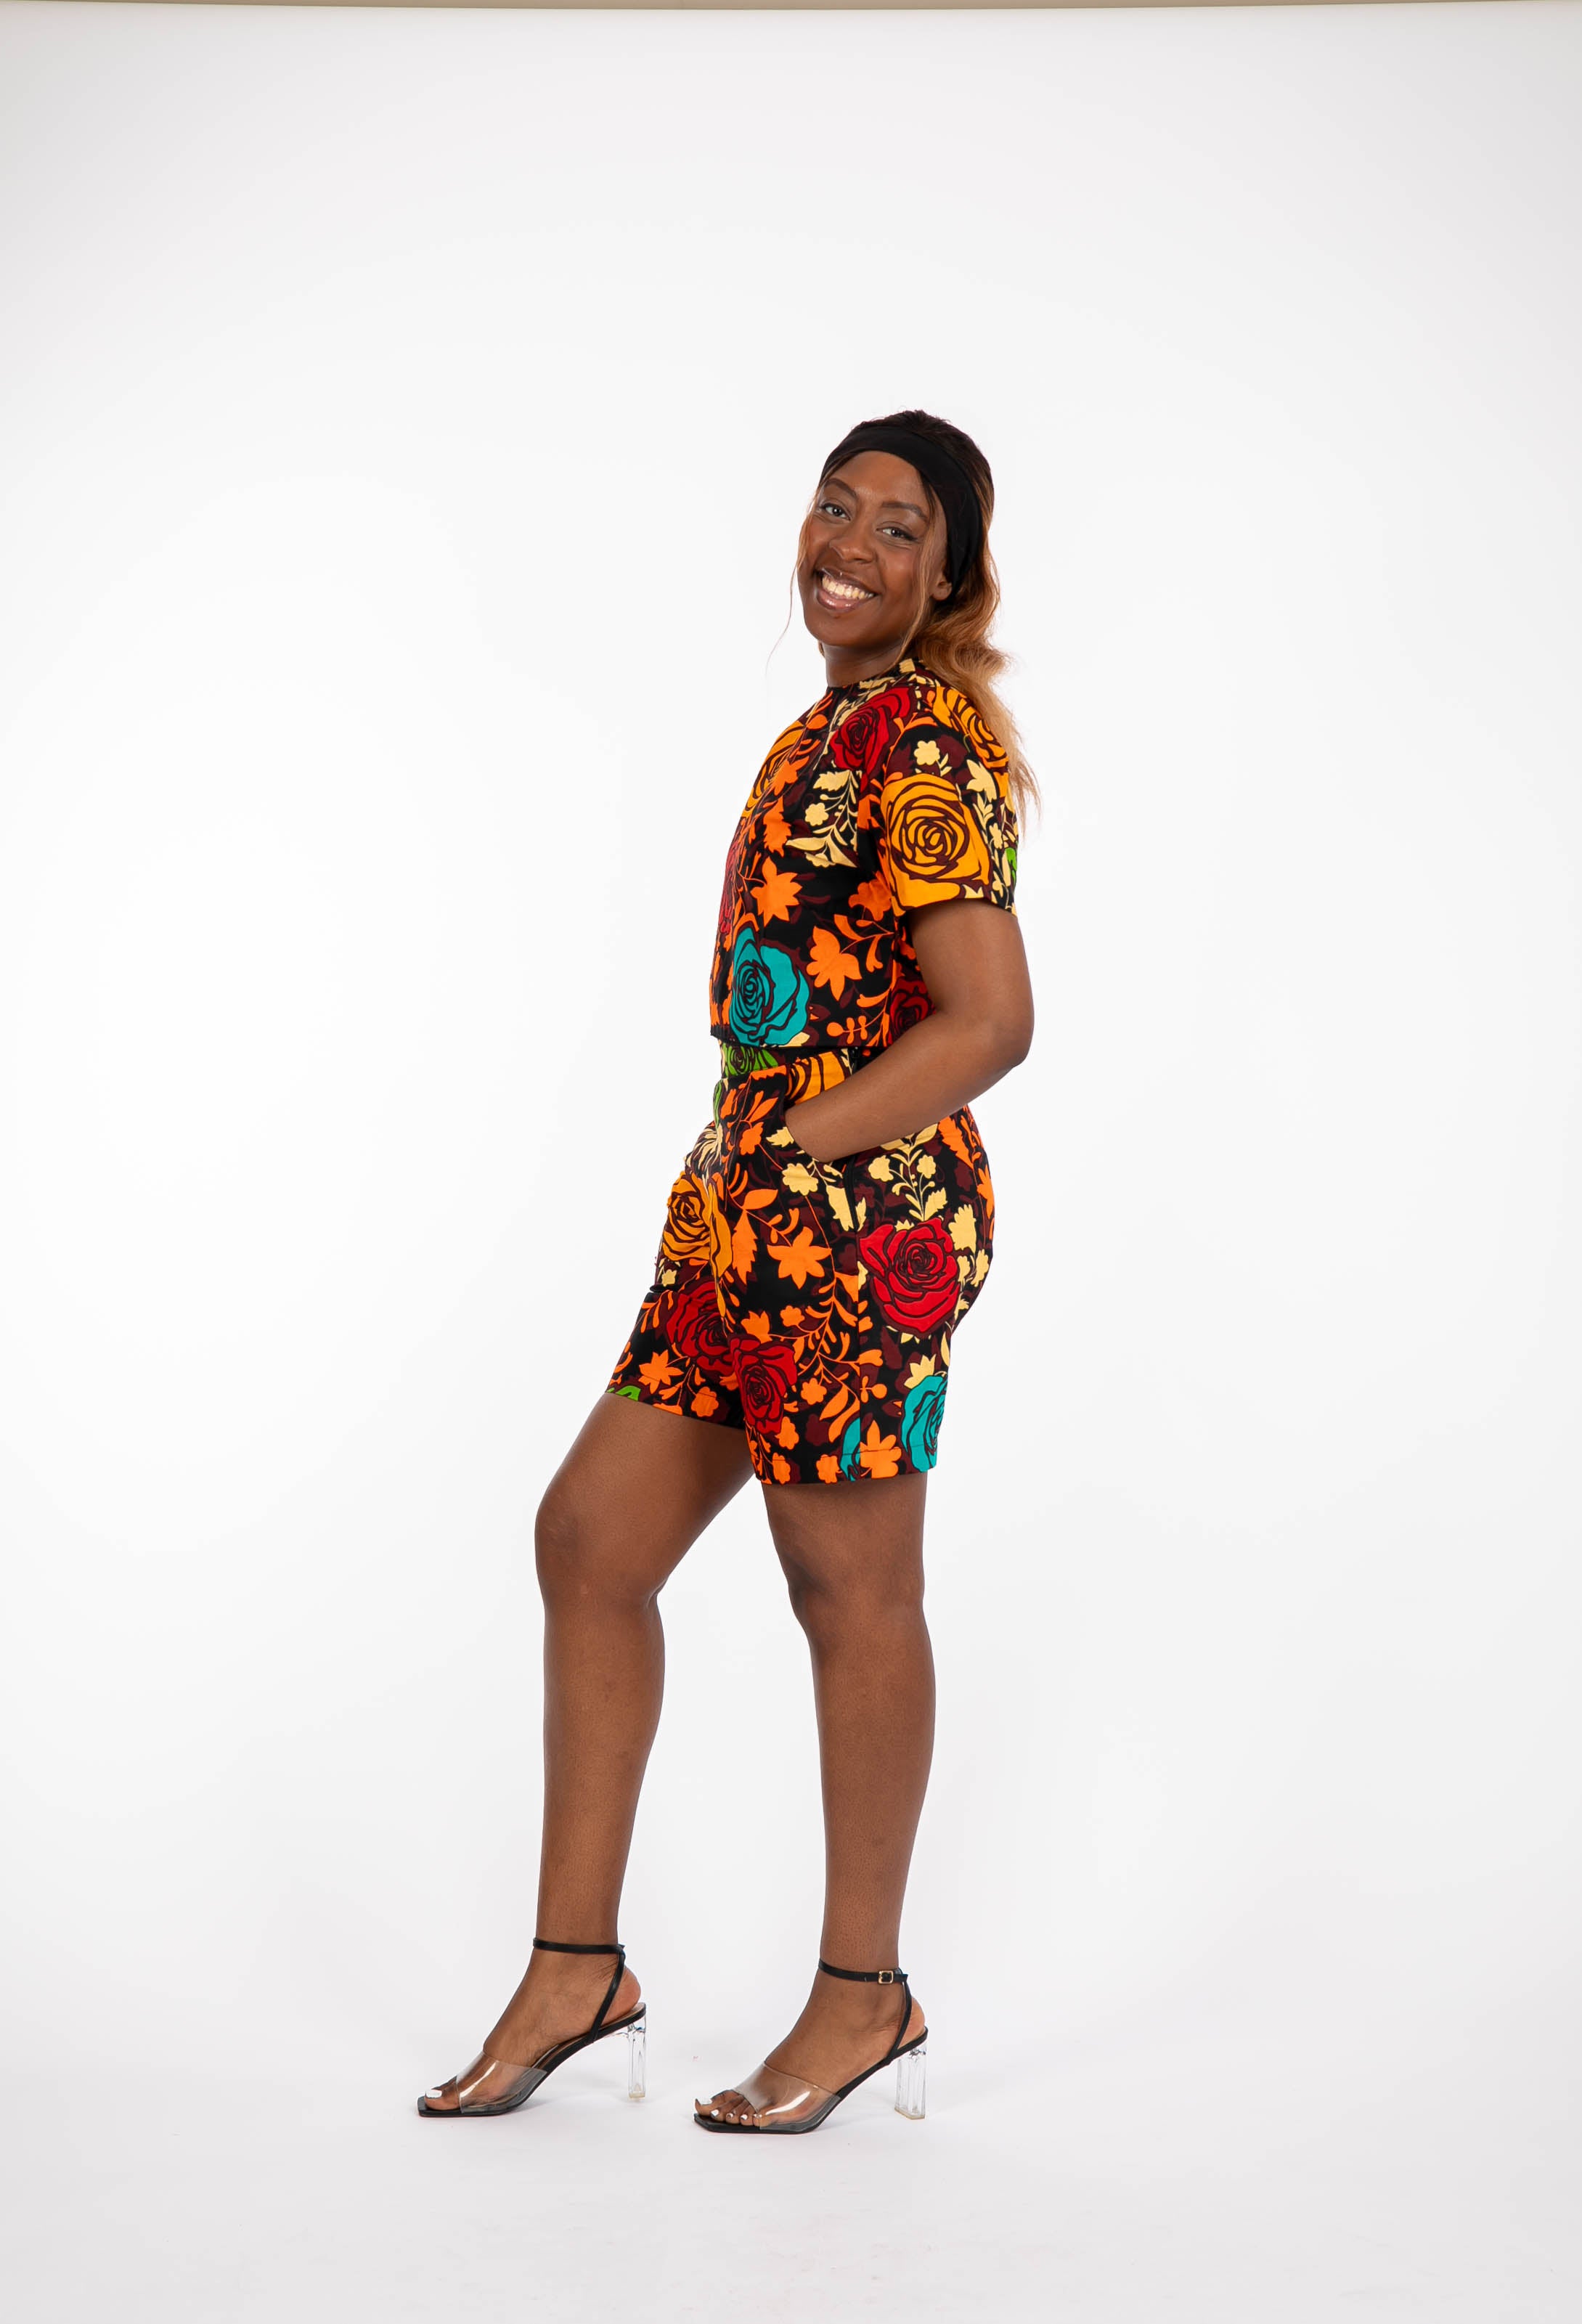 Temad collections Bombon  african print ankara shorts and top, Stylish African print bottoms and tops, African print Ankara fabric, African shorts, African crop top , African crop top , African print casual palazzo , African crop top for ladies, African flared trousers, Ankara crop top, Ankara top, Ankara crop top, latest Ankara shorts, african floral shorts and tops, stylish african shorts,  african crop top matching shorts